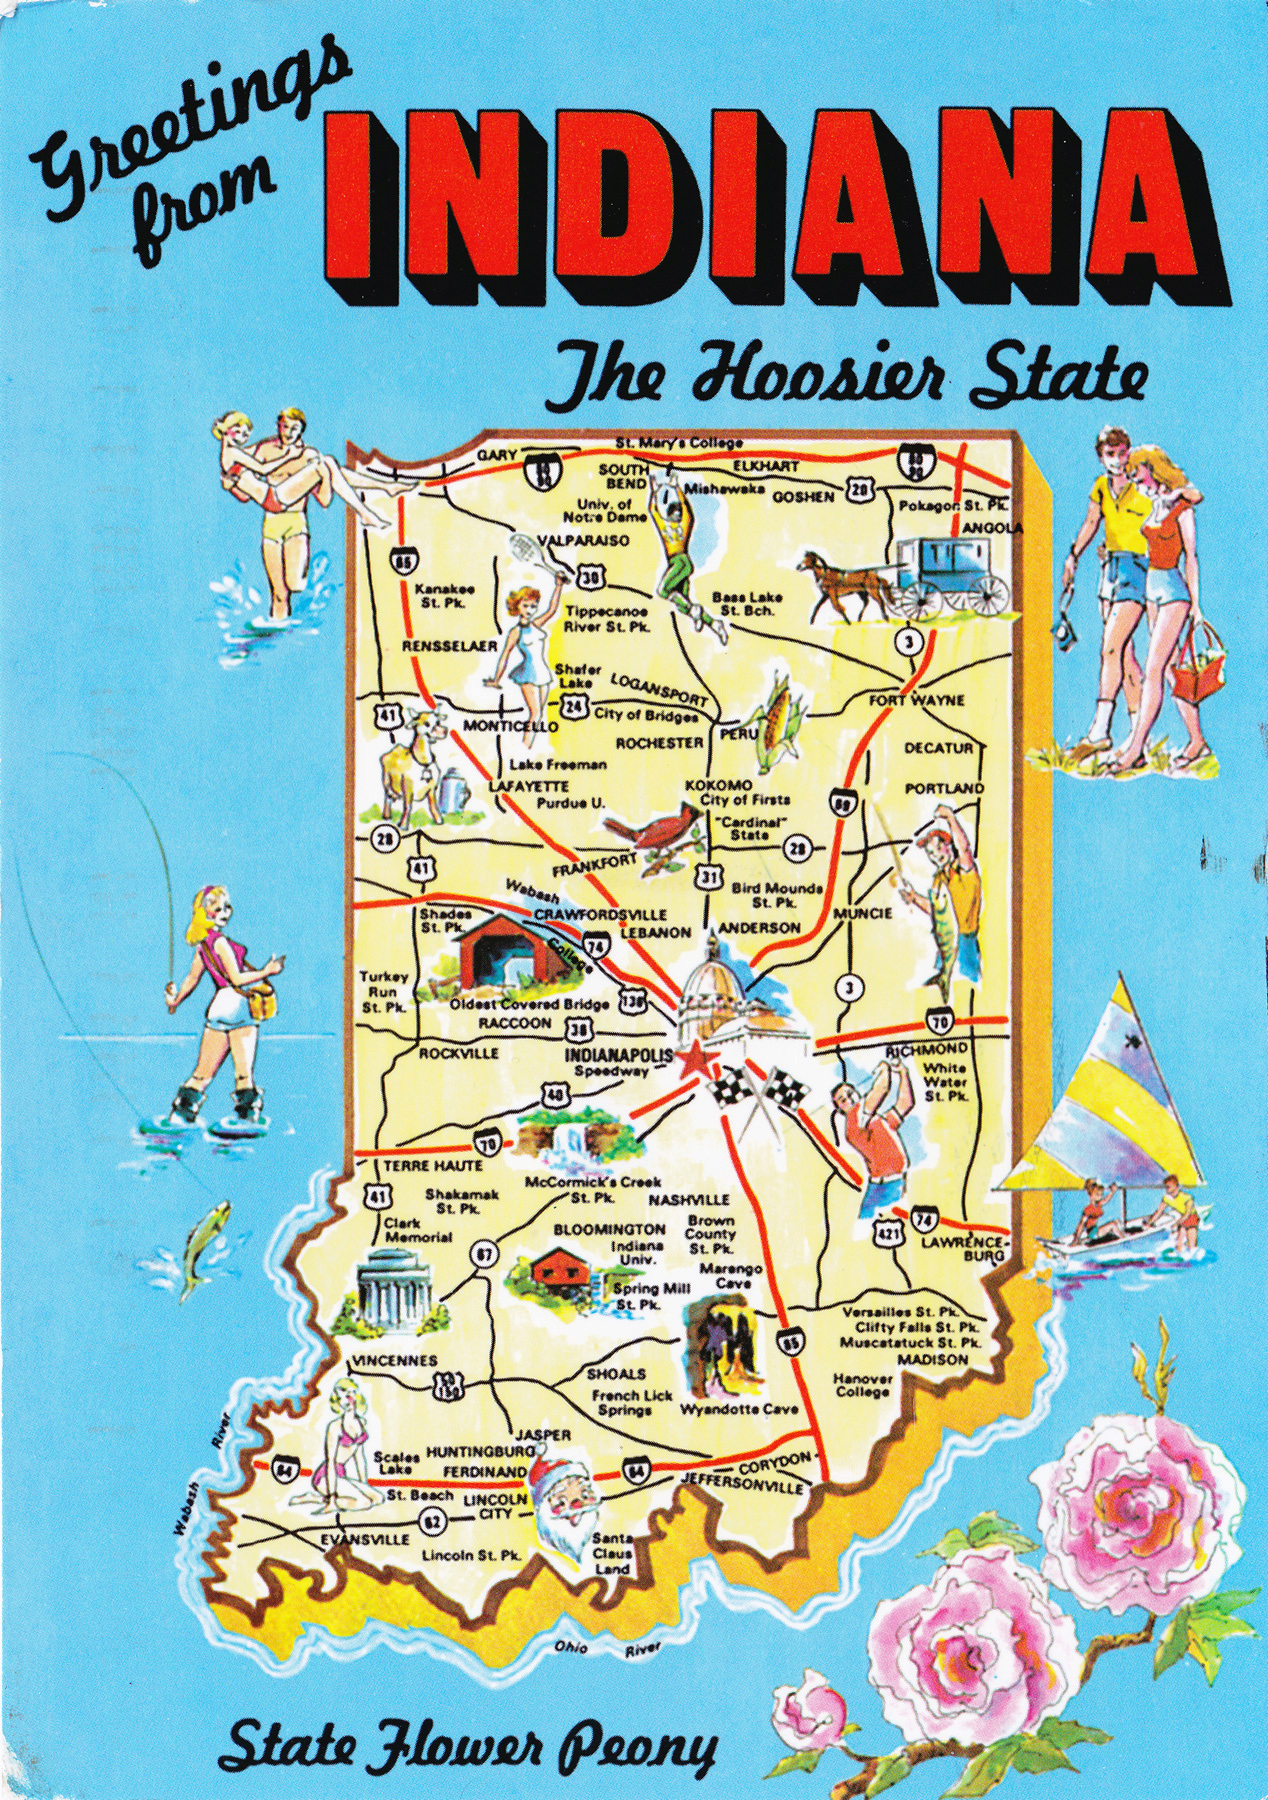 indiana tourism guide